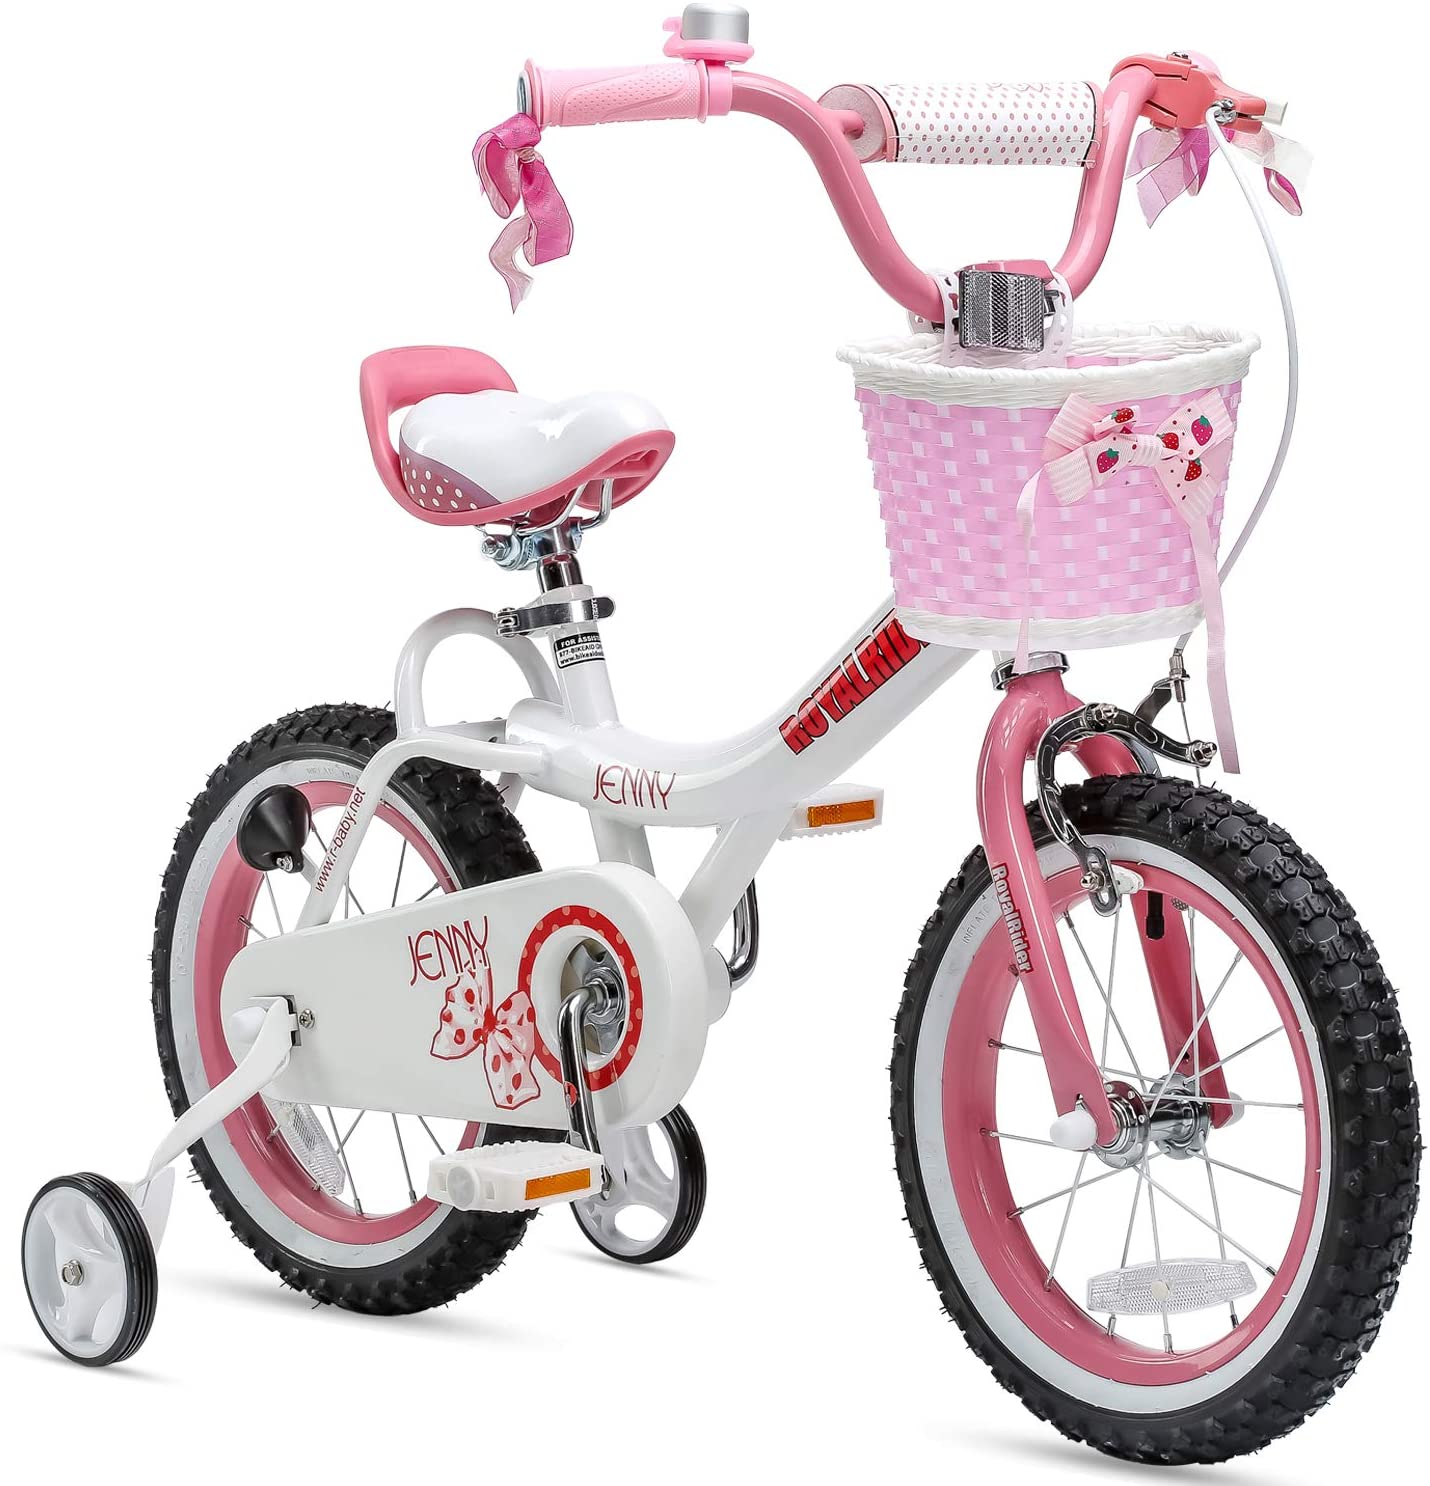 bike for a 5 year old